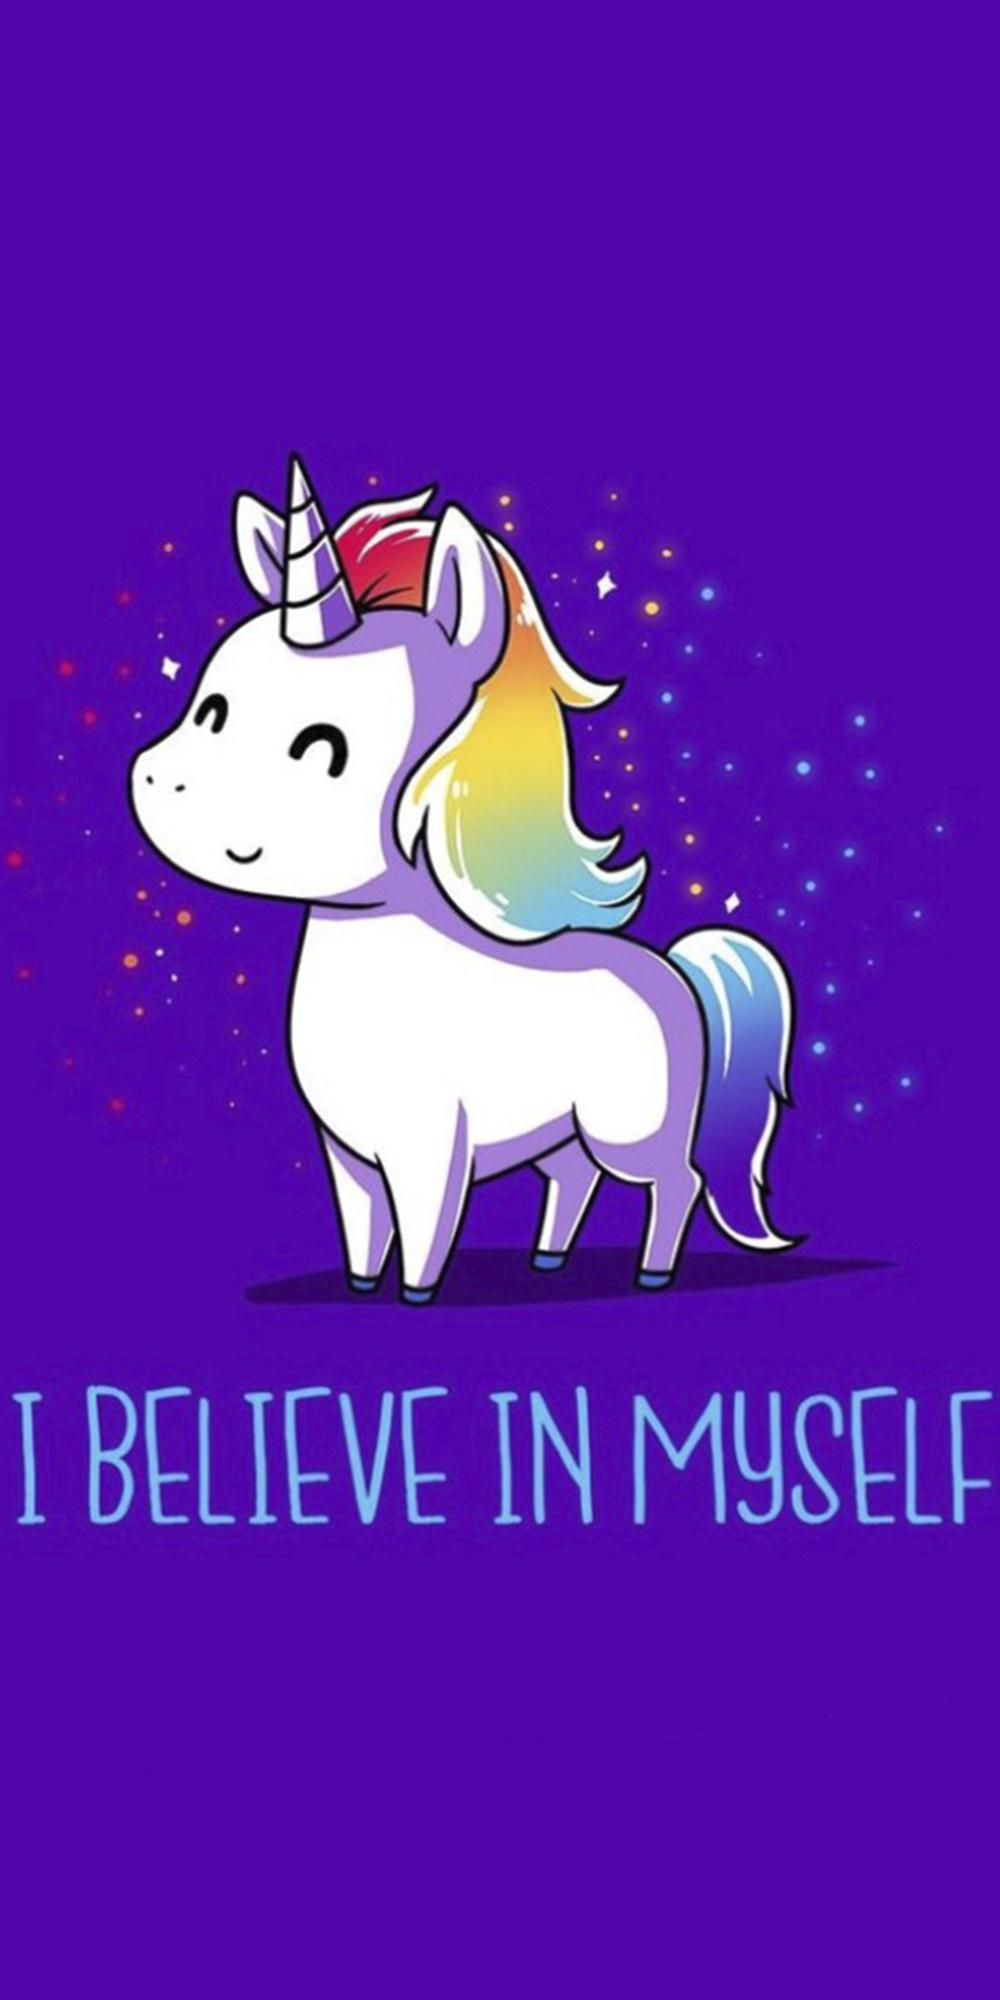 Unicorn Wallpaper Kawaii For Android APK Download